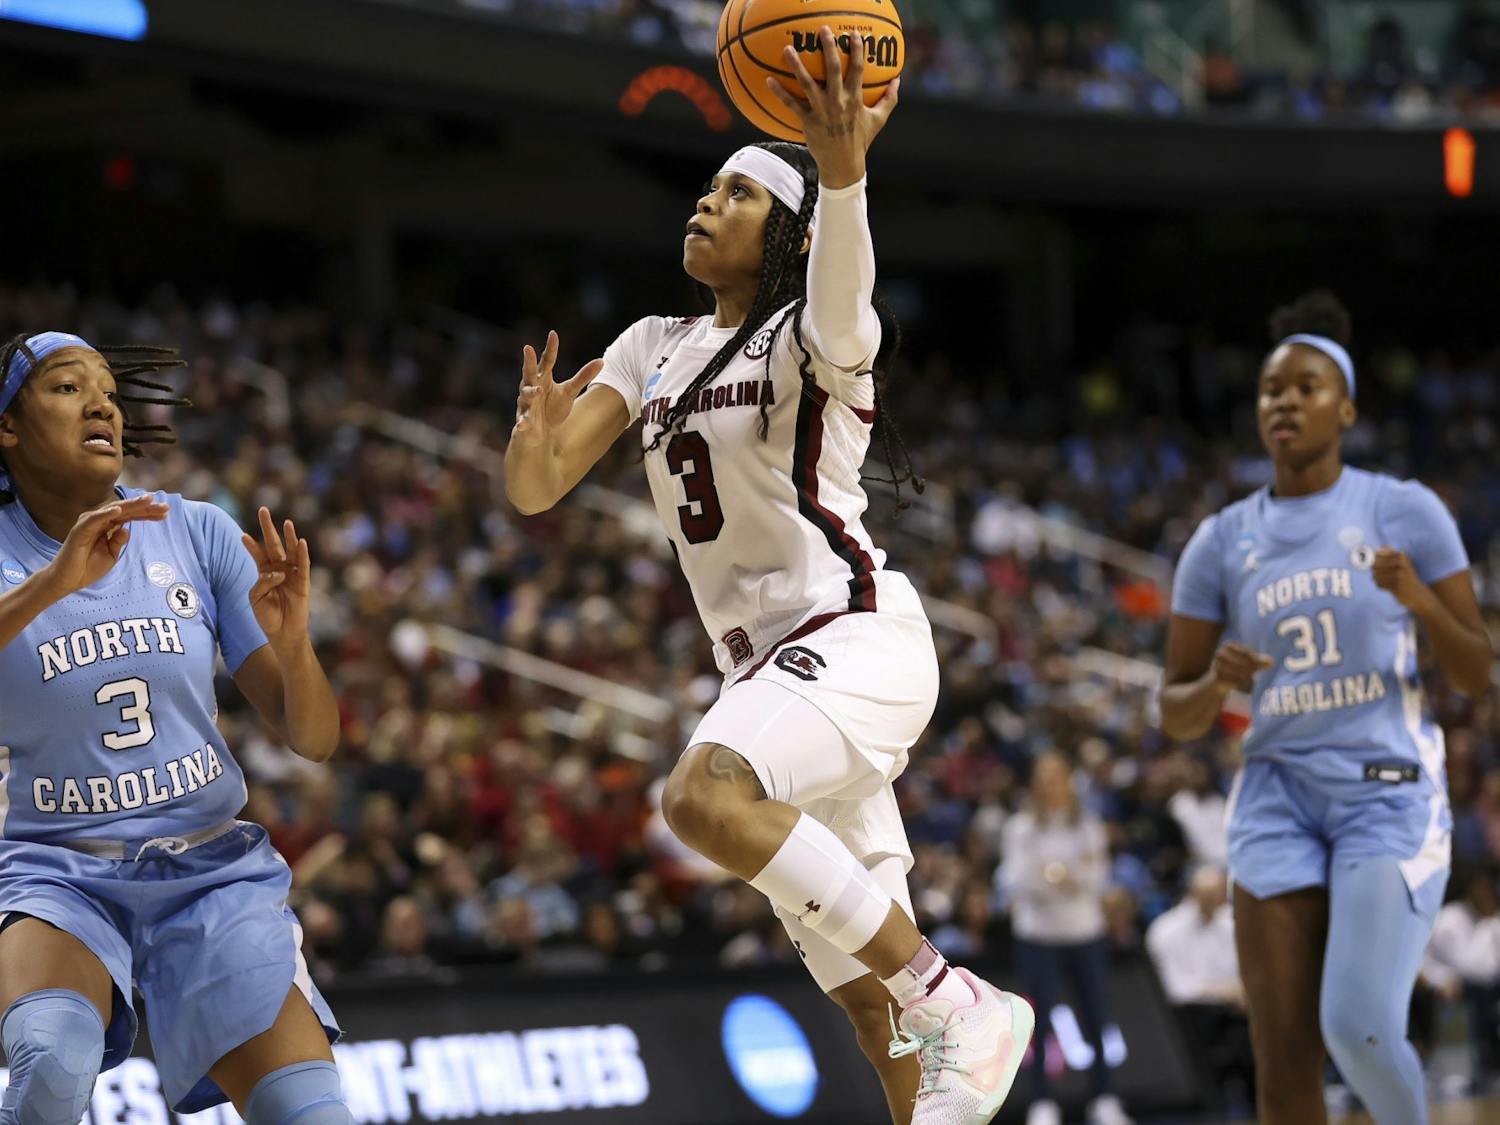 Senior guard Destanni Henderson goes for a layup during the third quarter of South Carolina's 69-61 victory over North Carolina in the Sweet Sixteen on March 25, 2022.